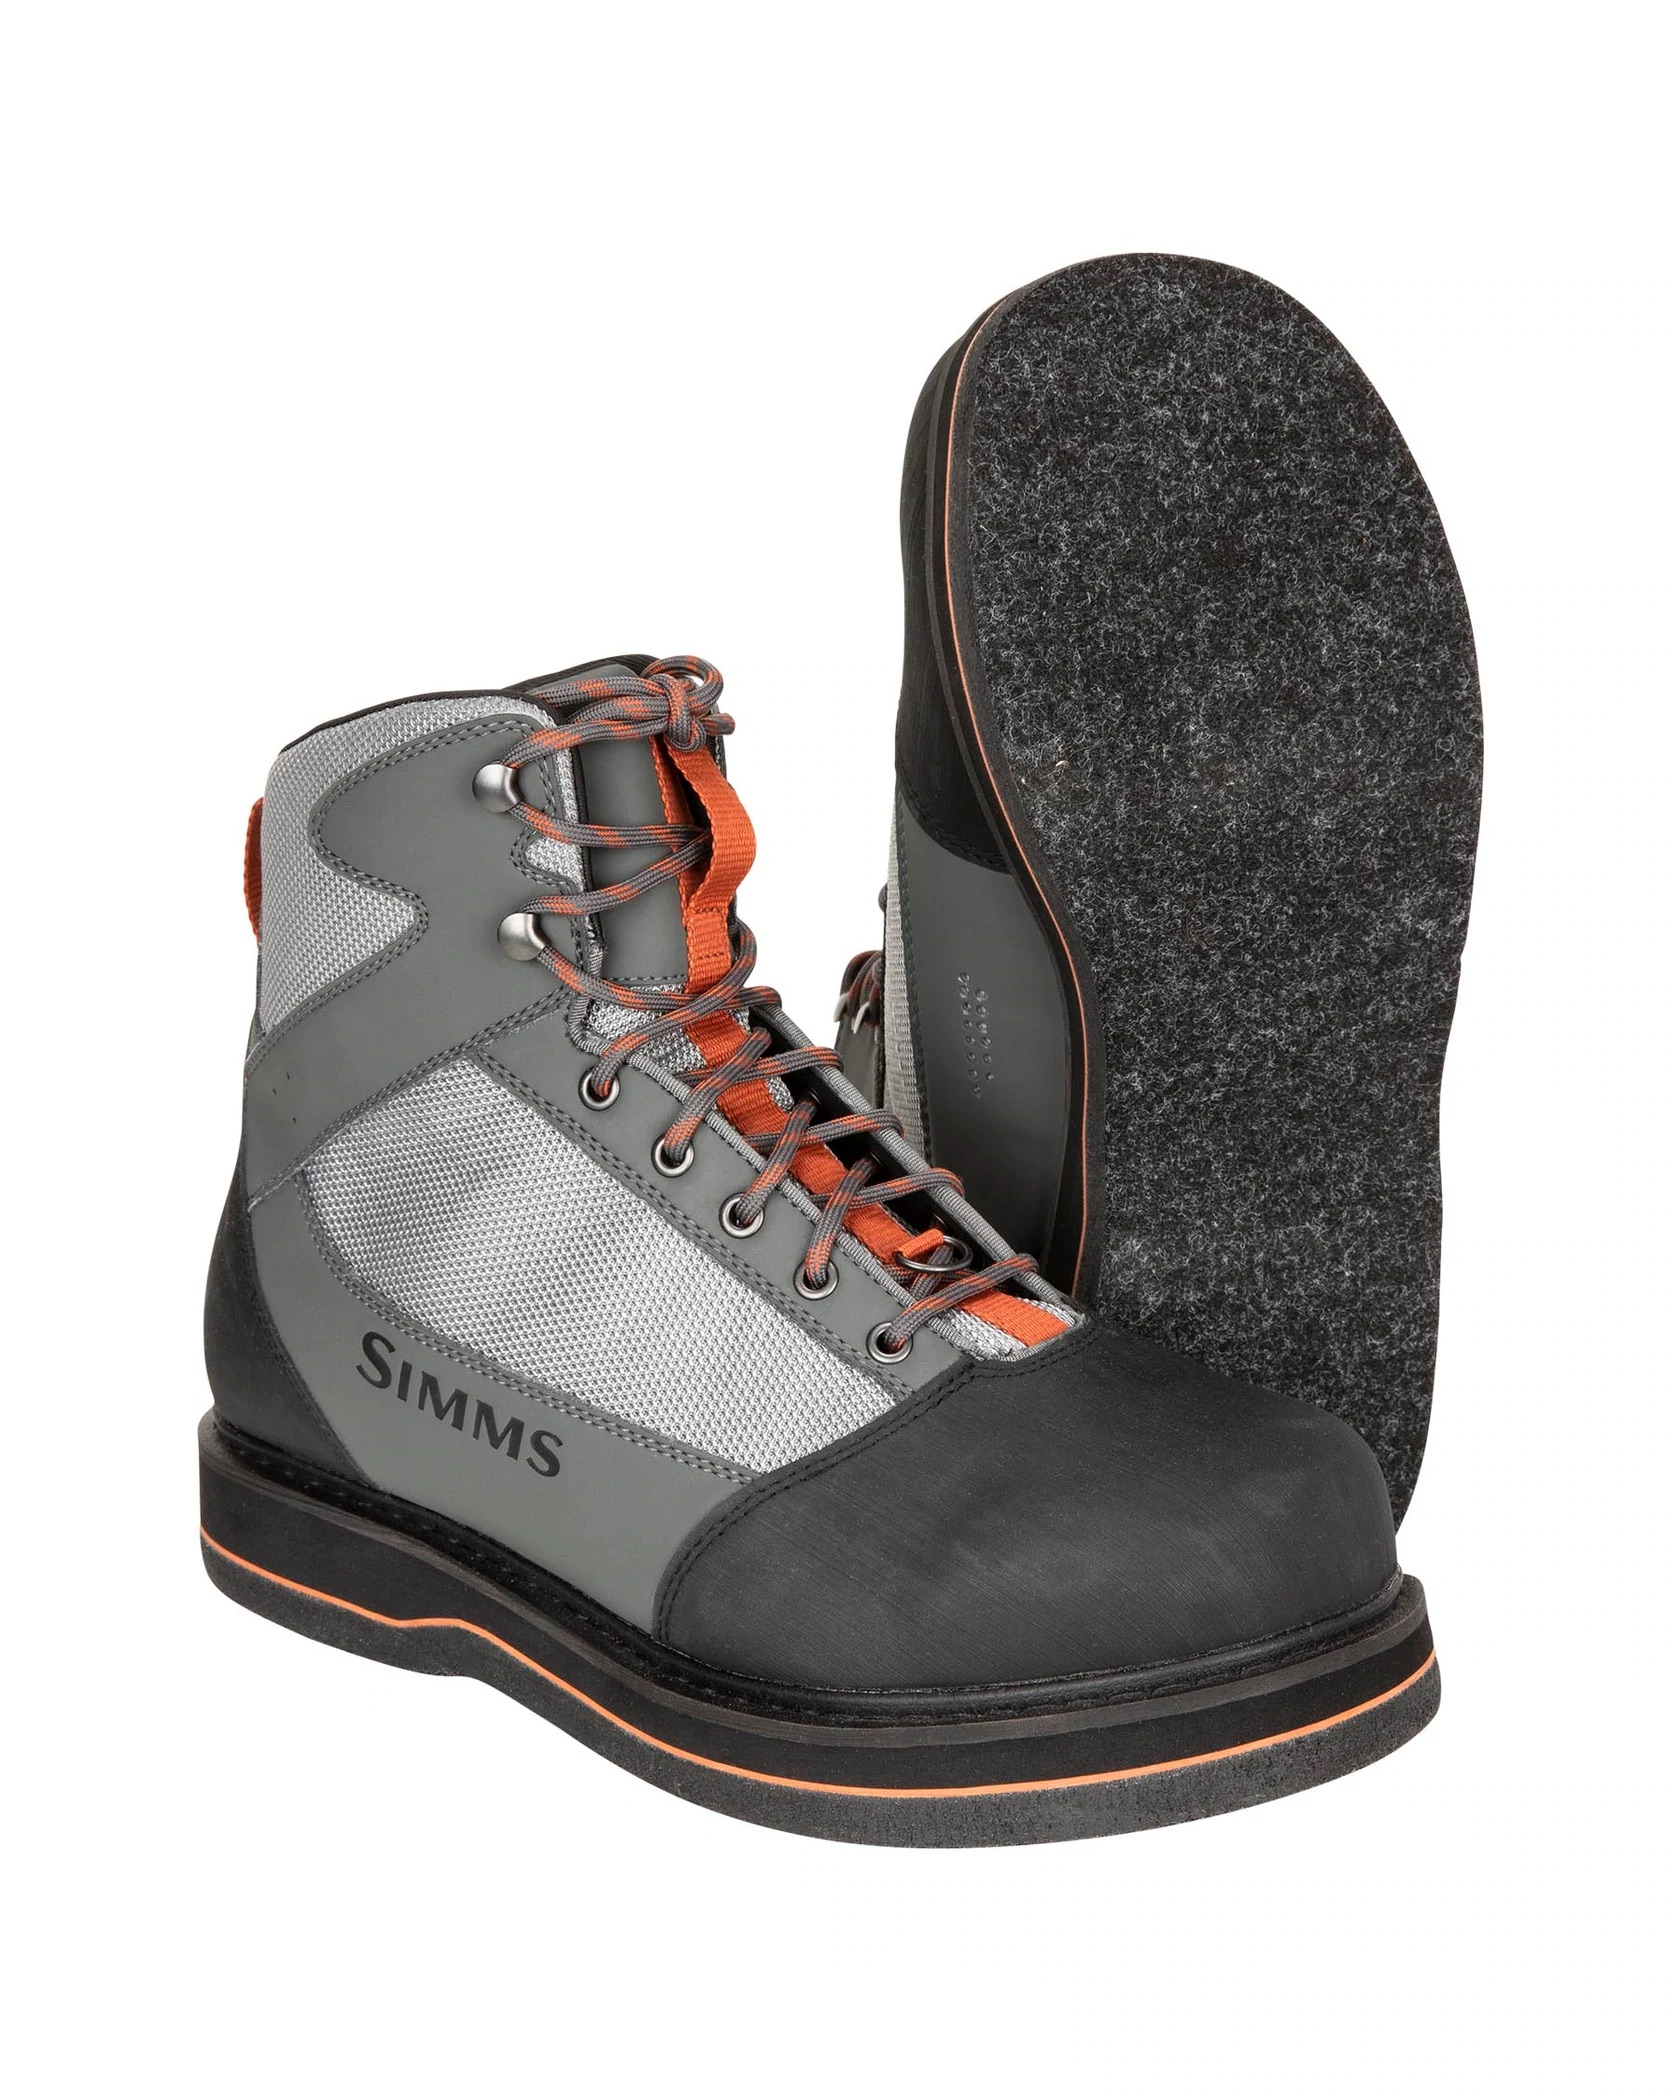 Simms Tributary Boot - Felt - Size 9